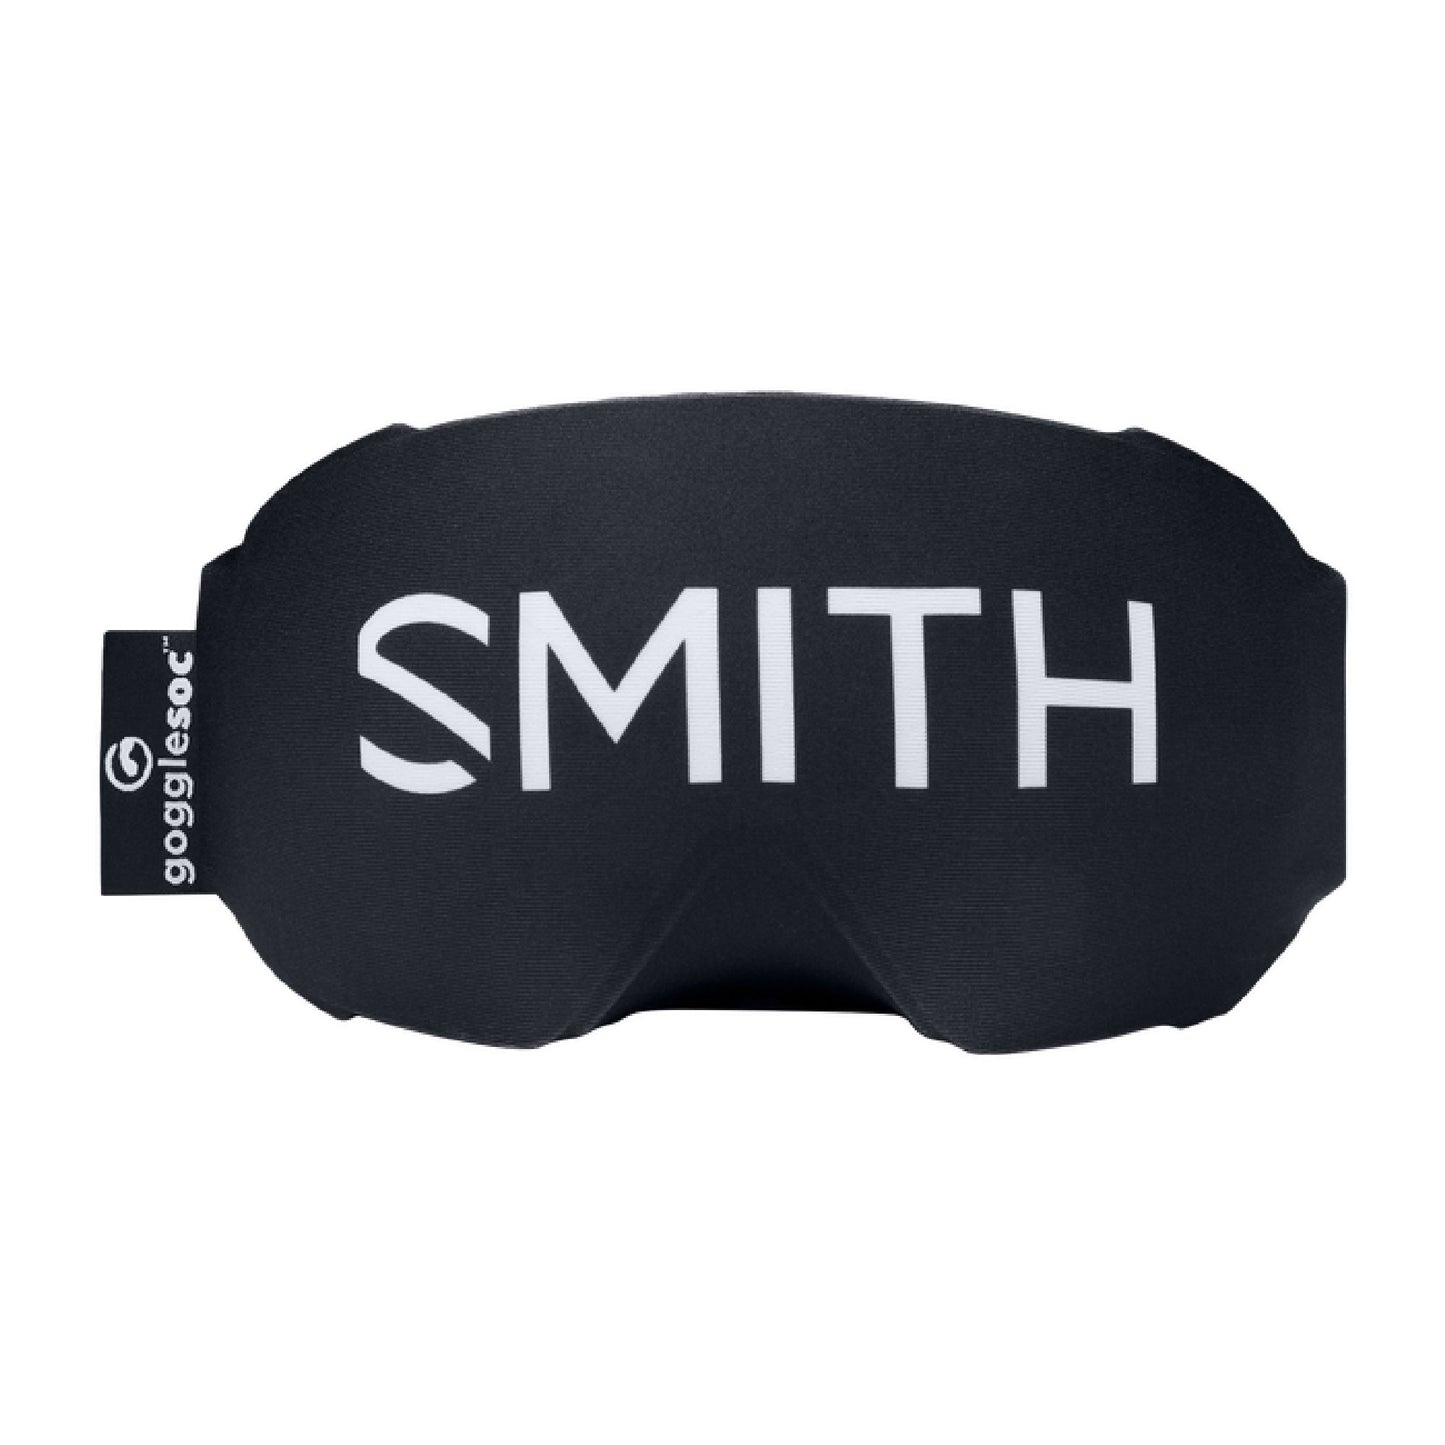 Smith 4D MAG S Snow Goggle White Chunky Knit ChromaPop Everyday Rose Gold Mirror Snow Goggles